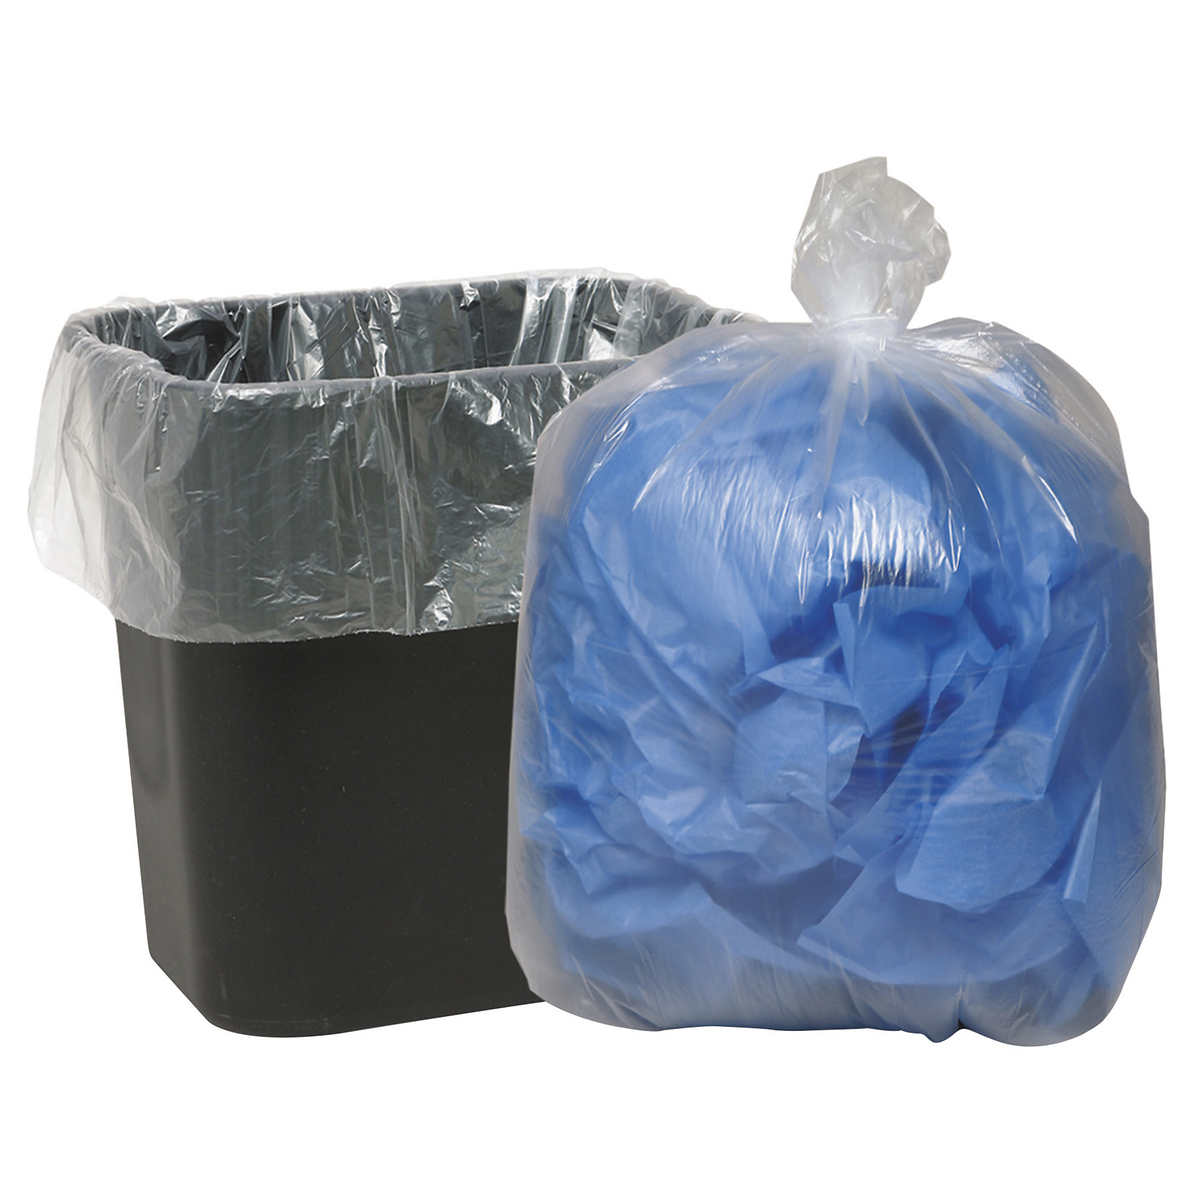 Price check: Who's selling the cheapest clear garbage bags?, City, Halifax, Nova Scotia